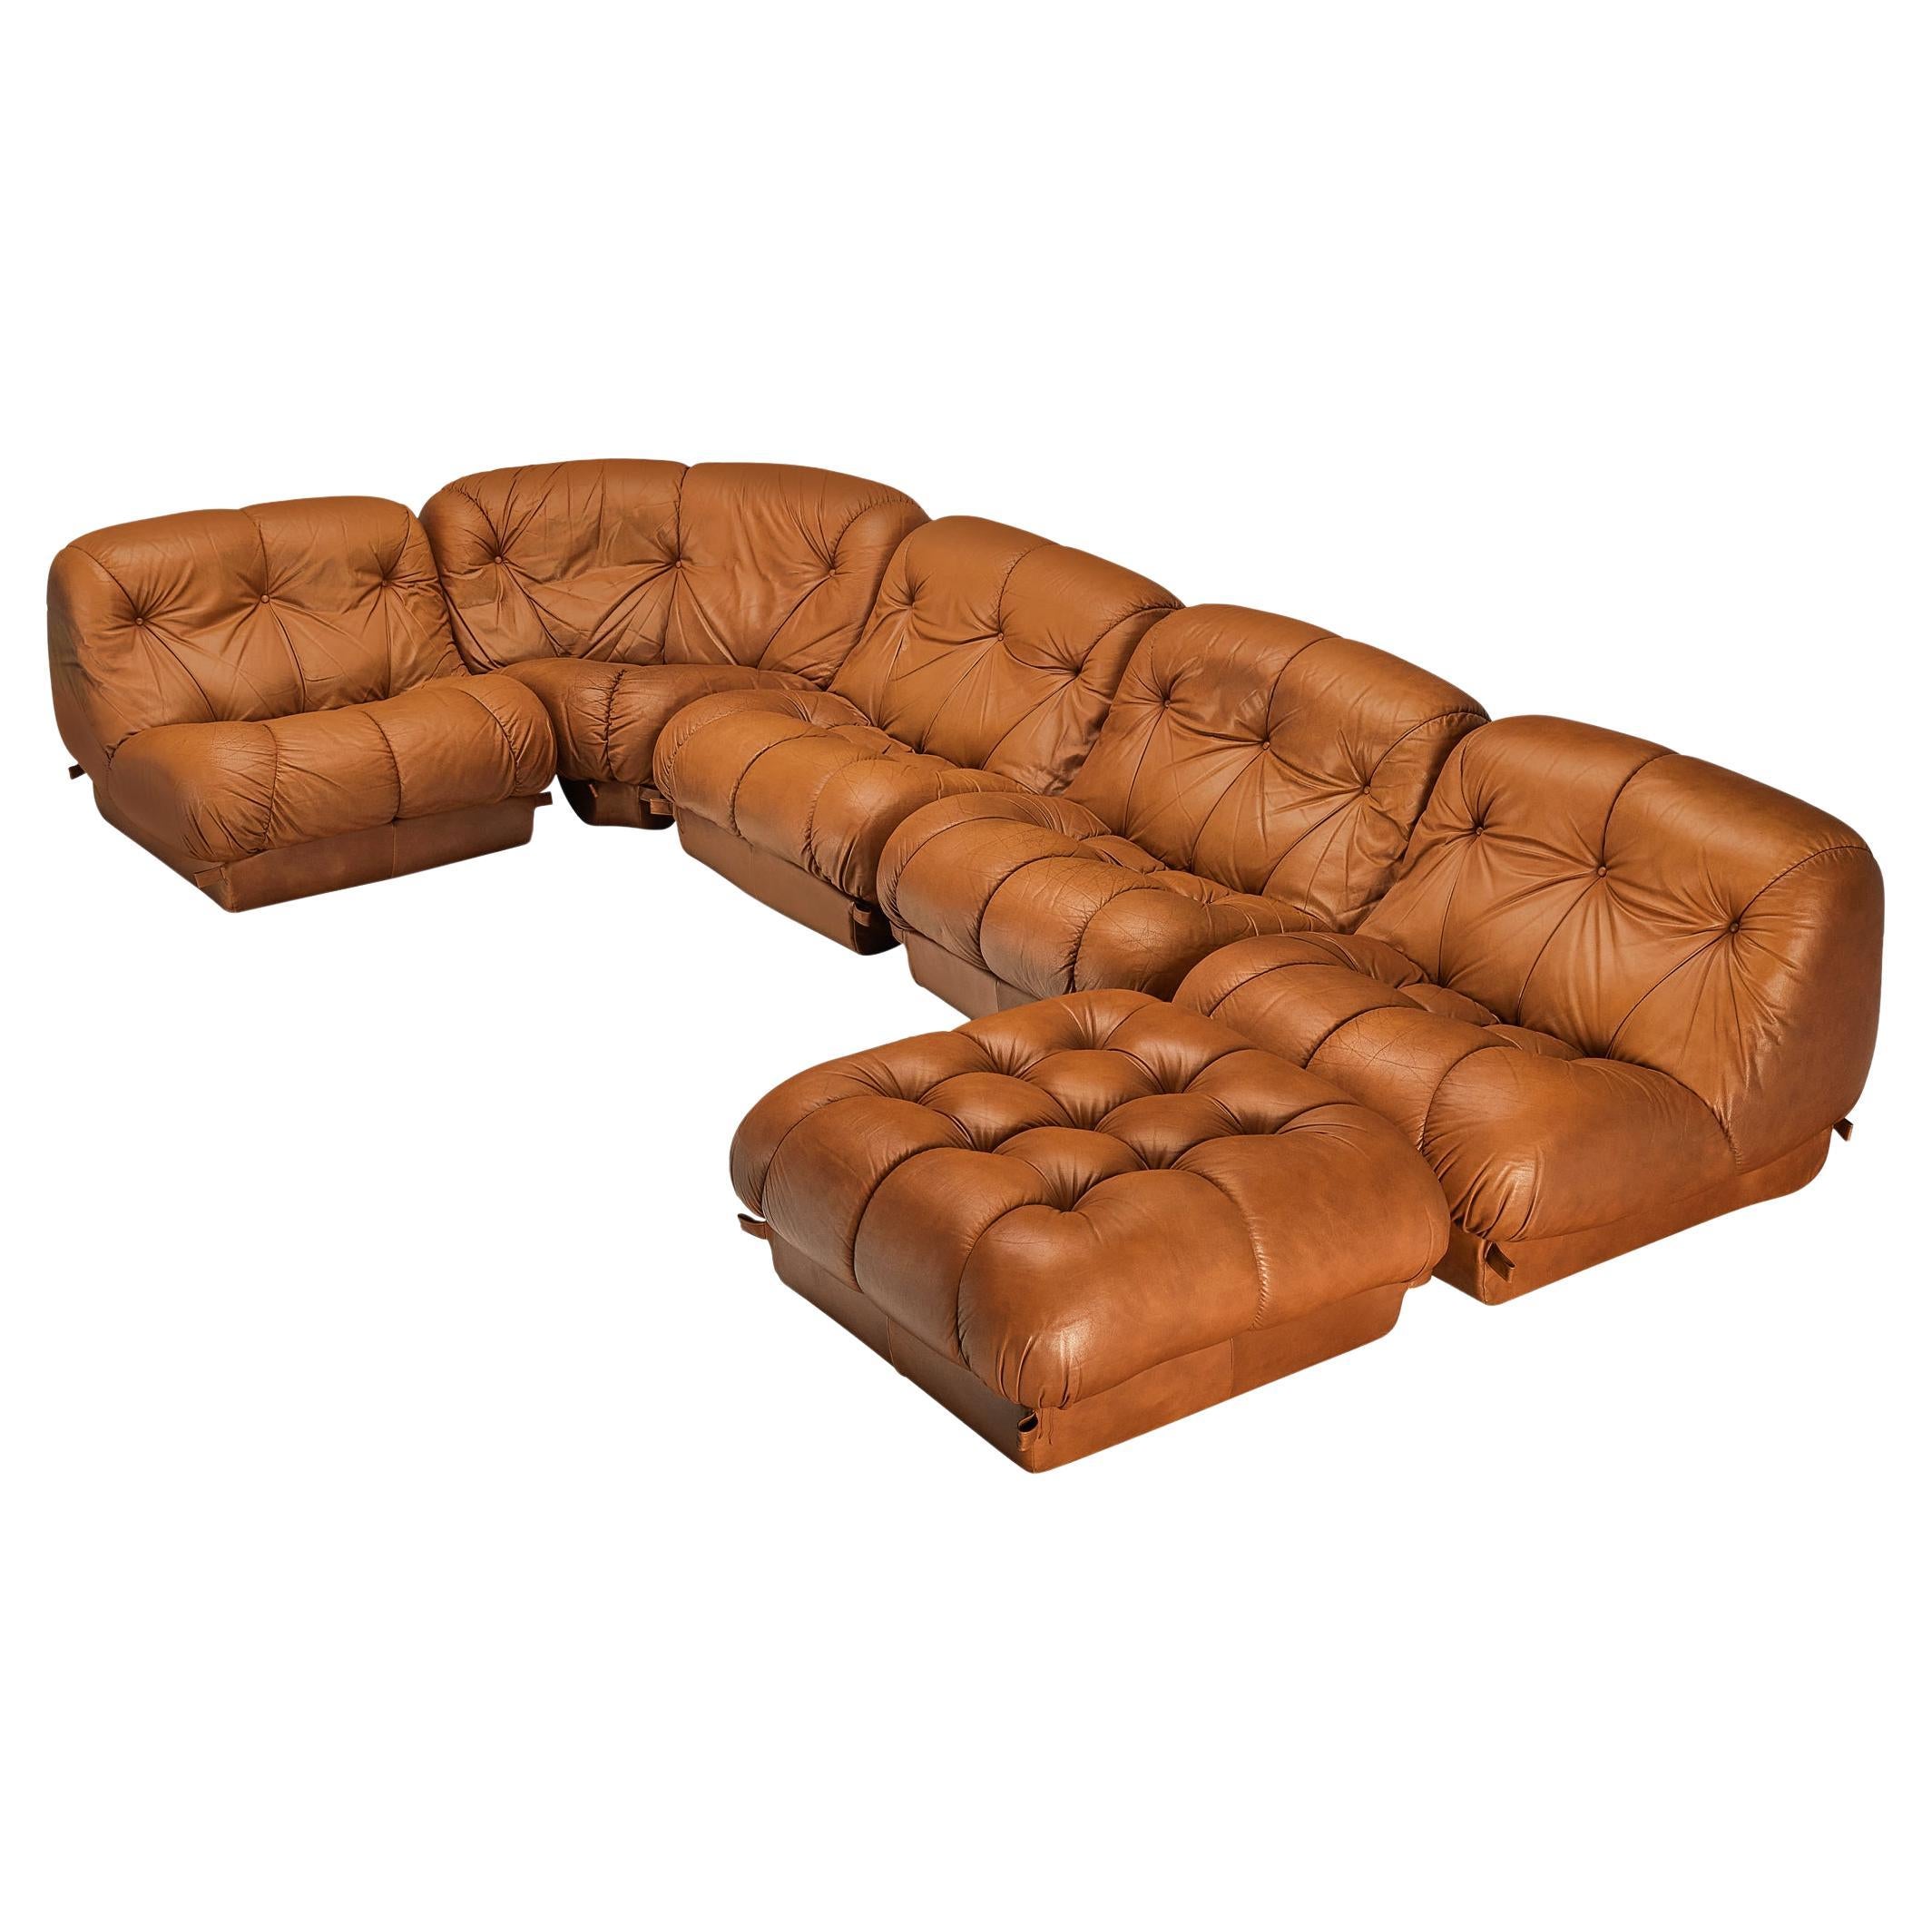 What is good-quality leather for sofas?